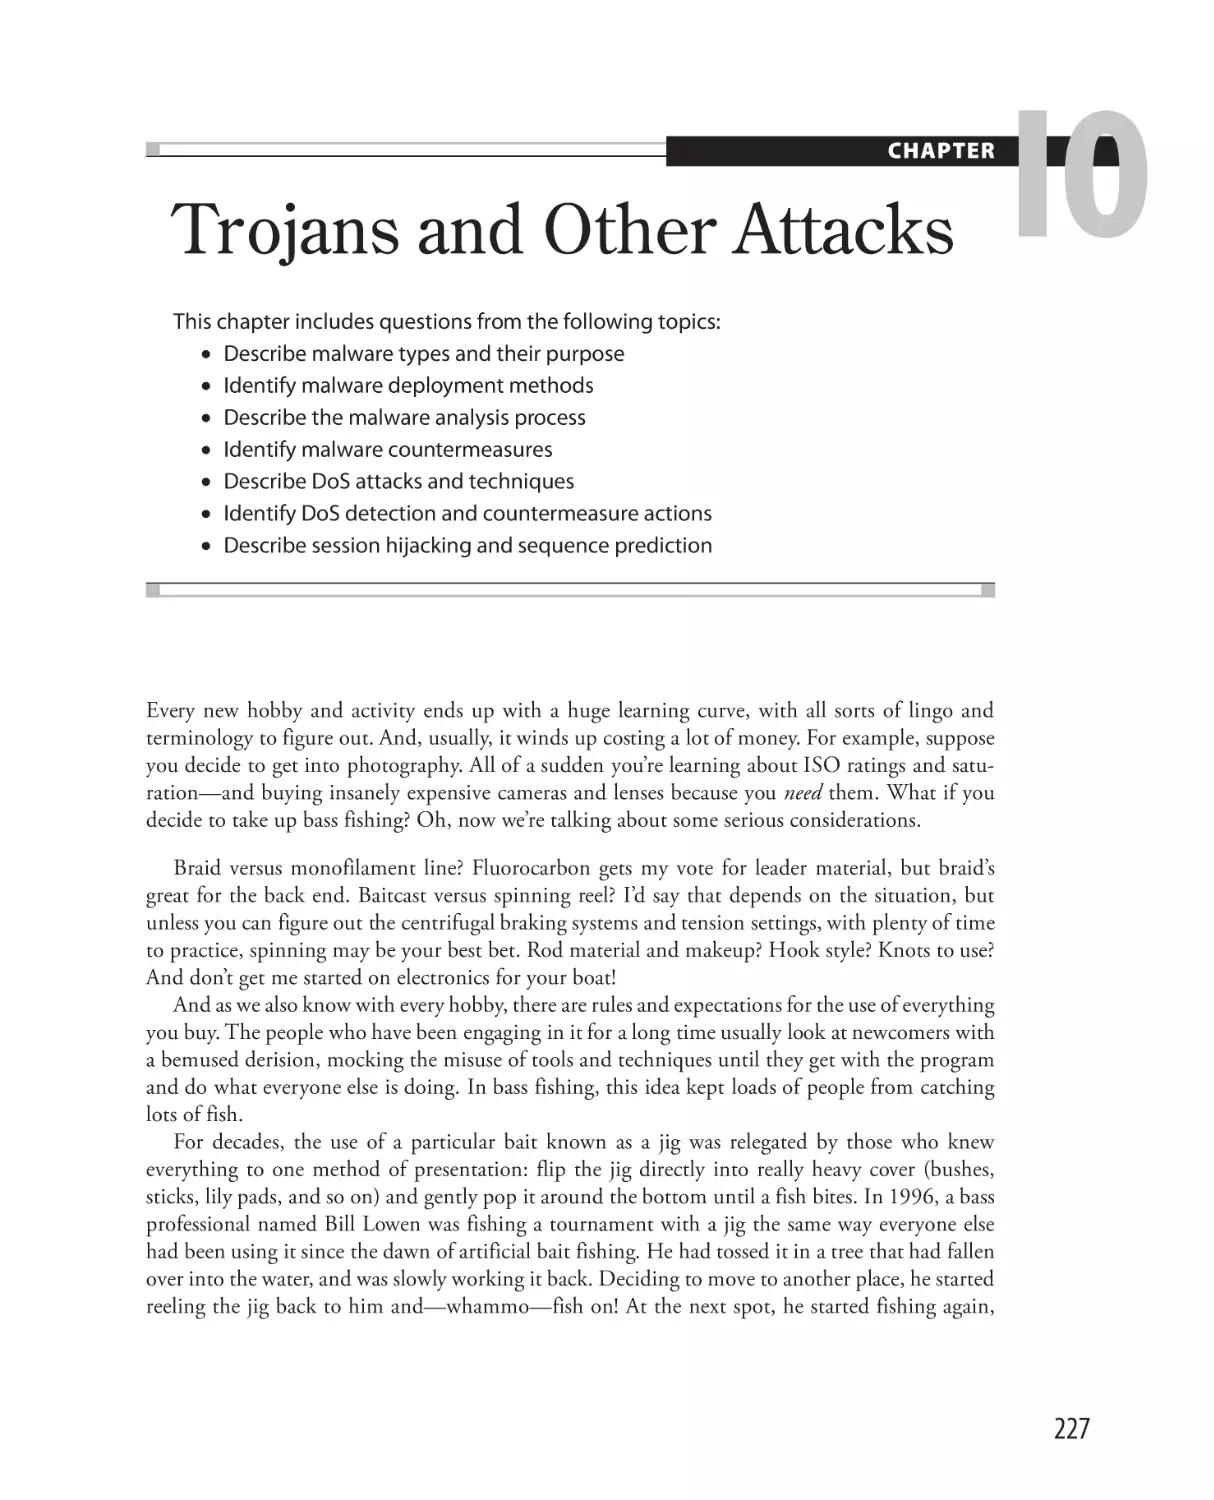 Trojans and Other Attacks